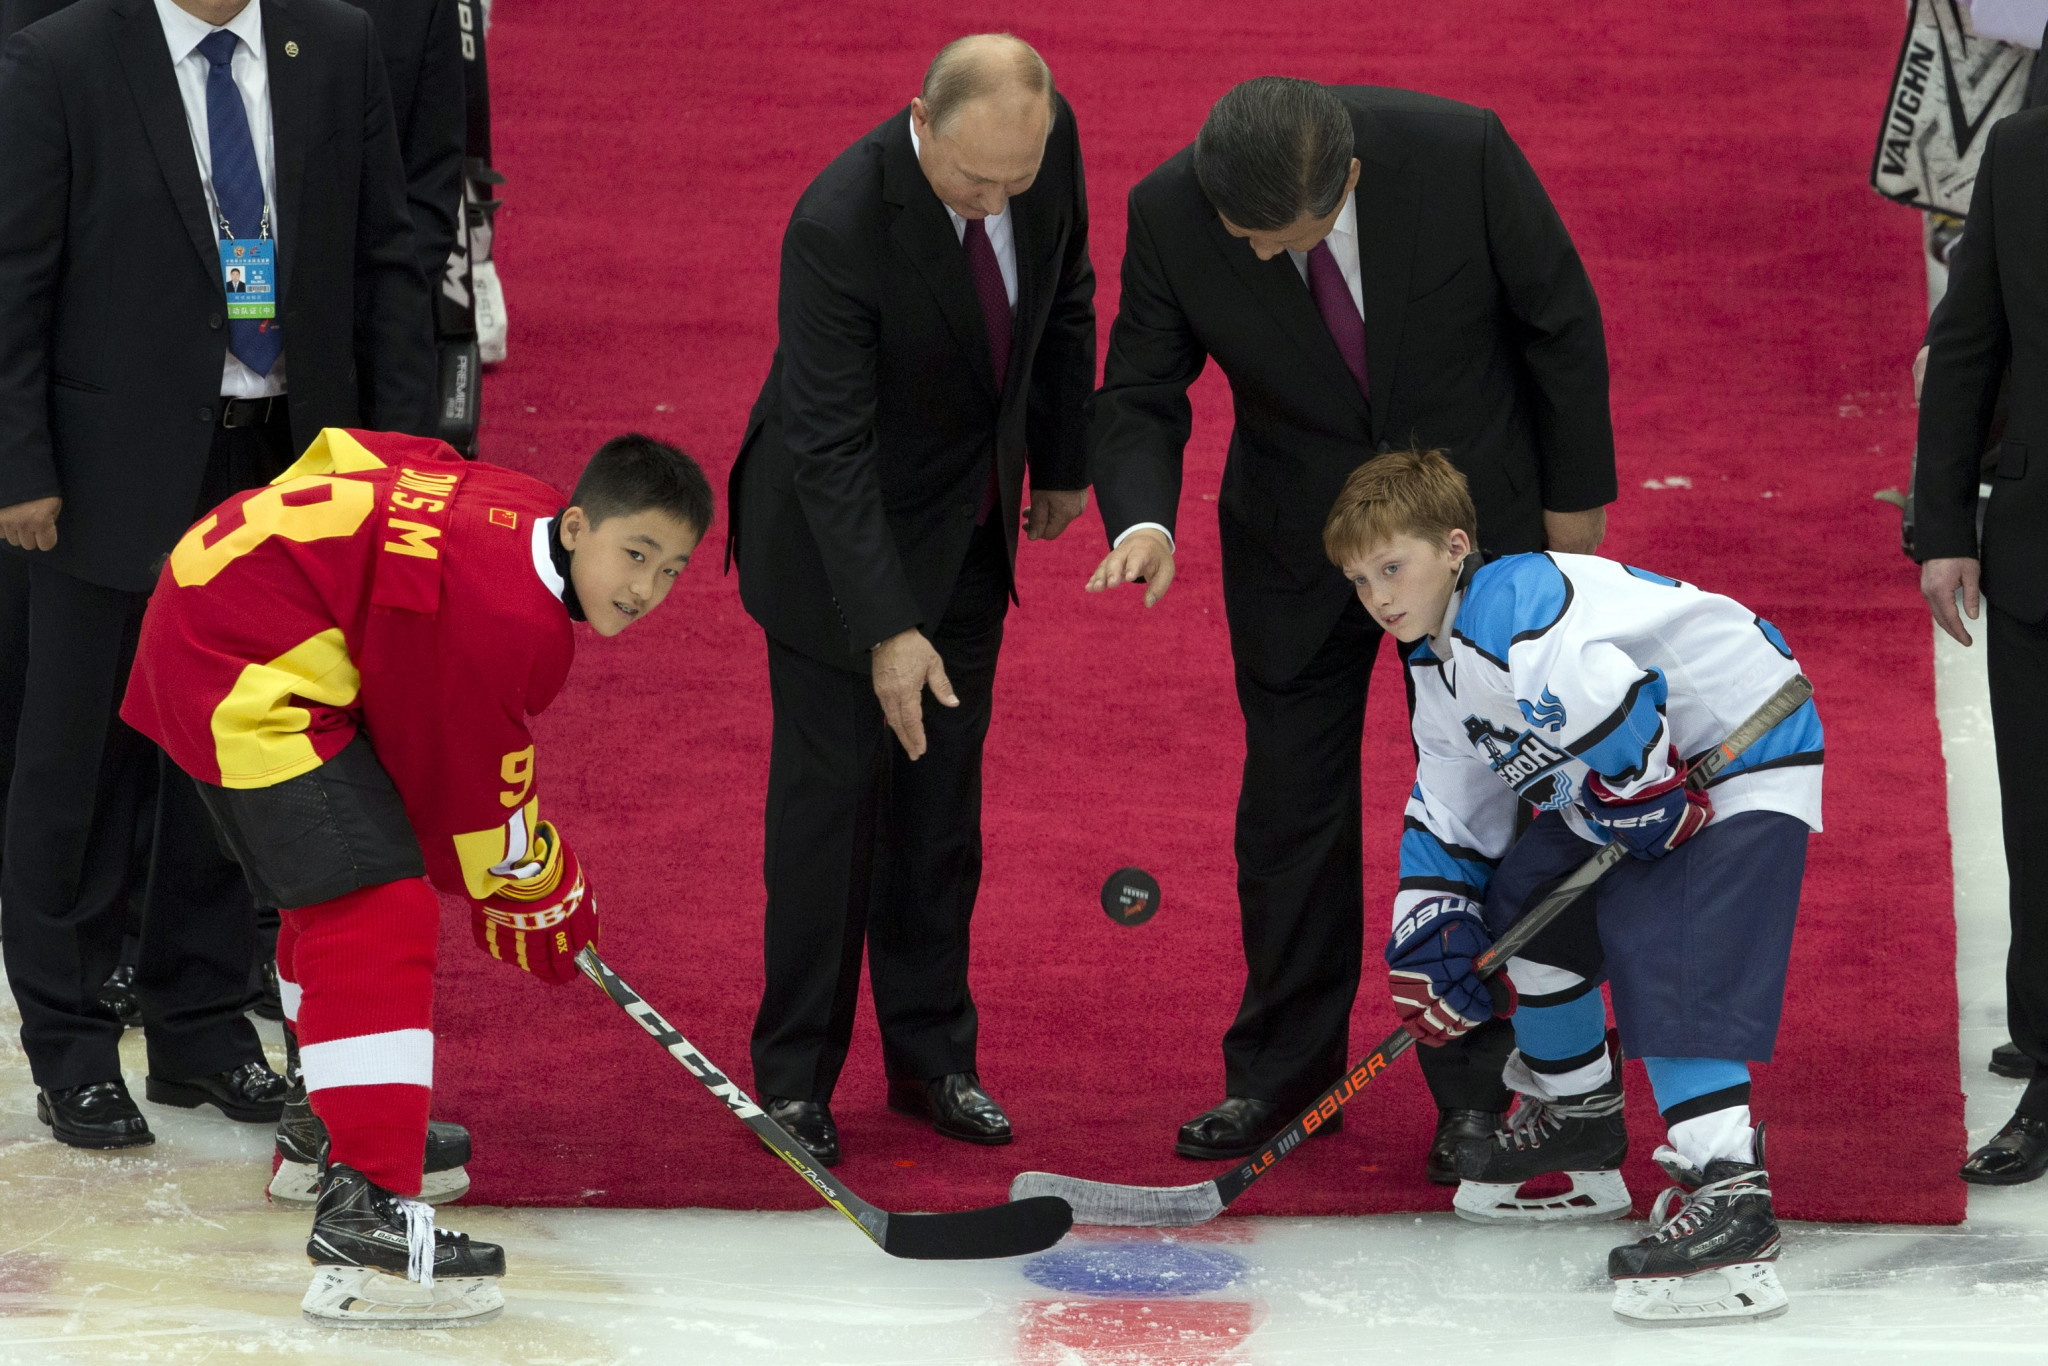 The youth team ice hockey match took place in Tianjin ©Getty Images